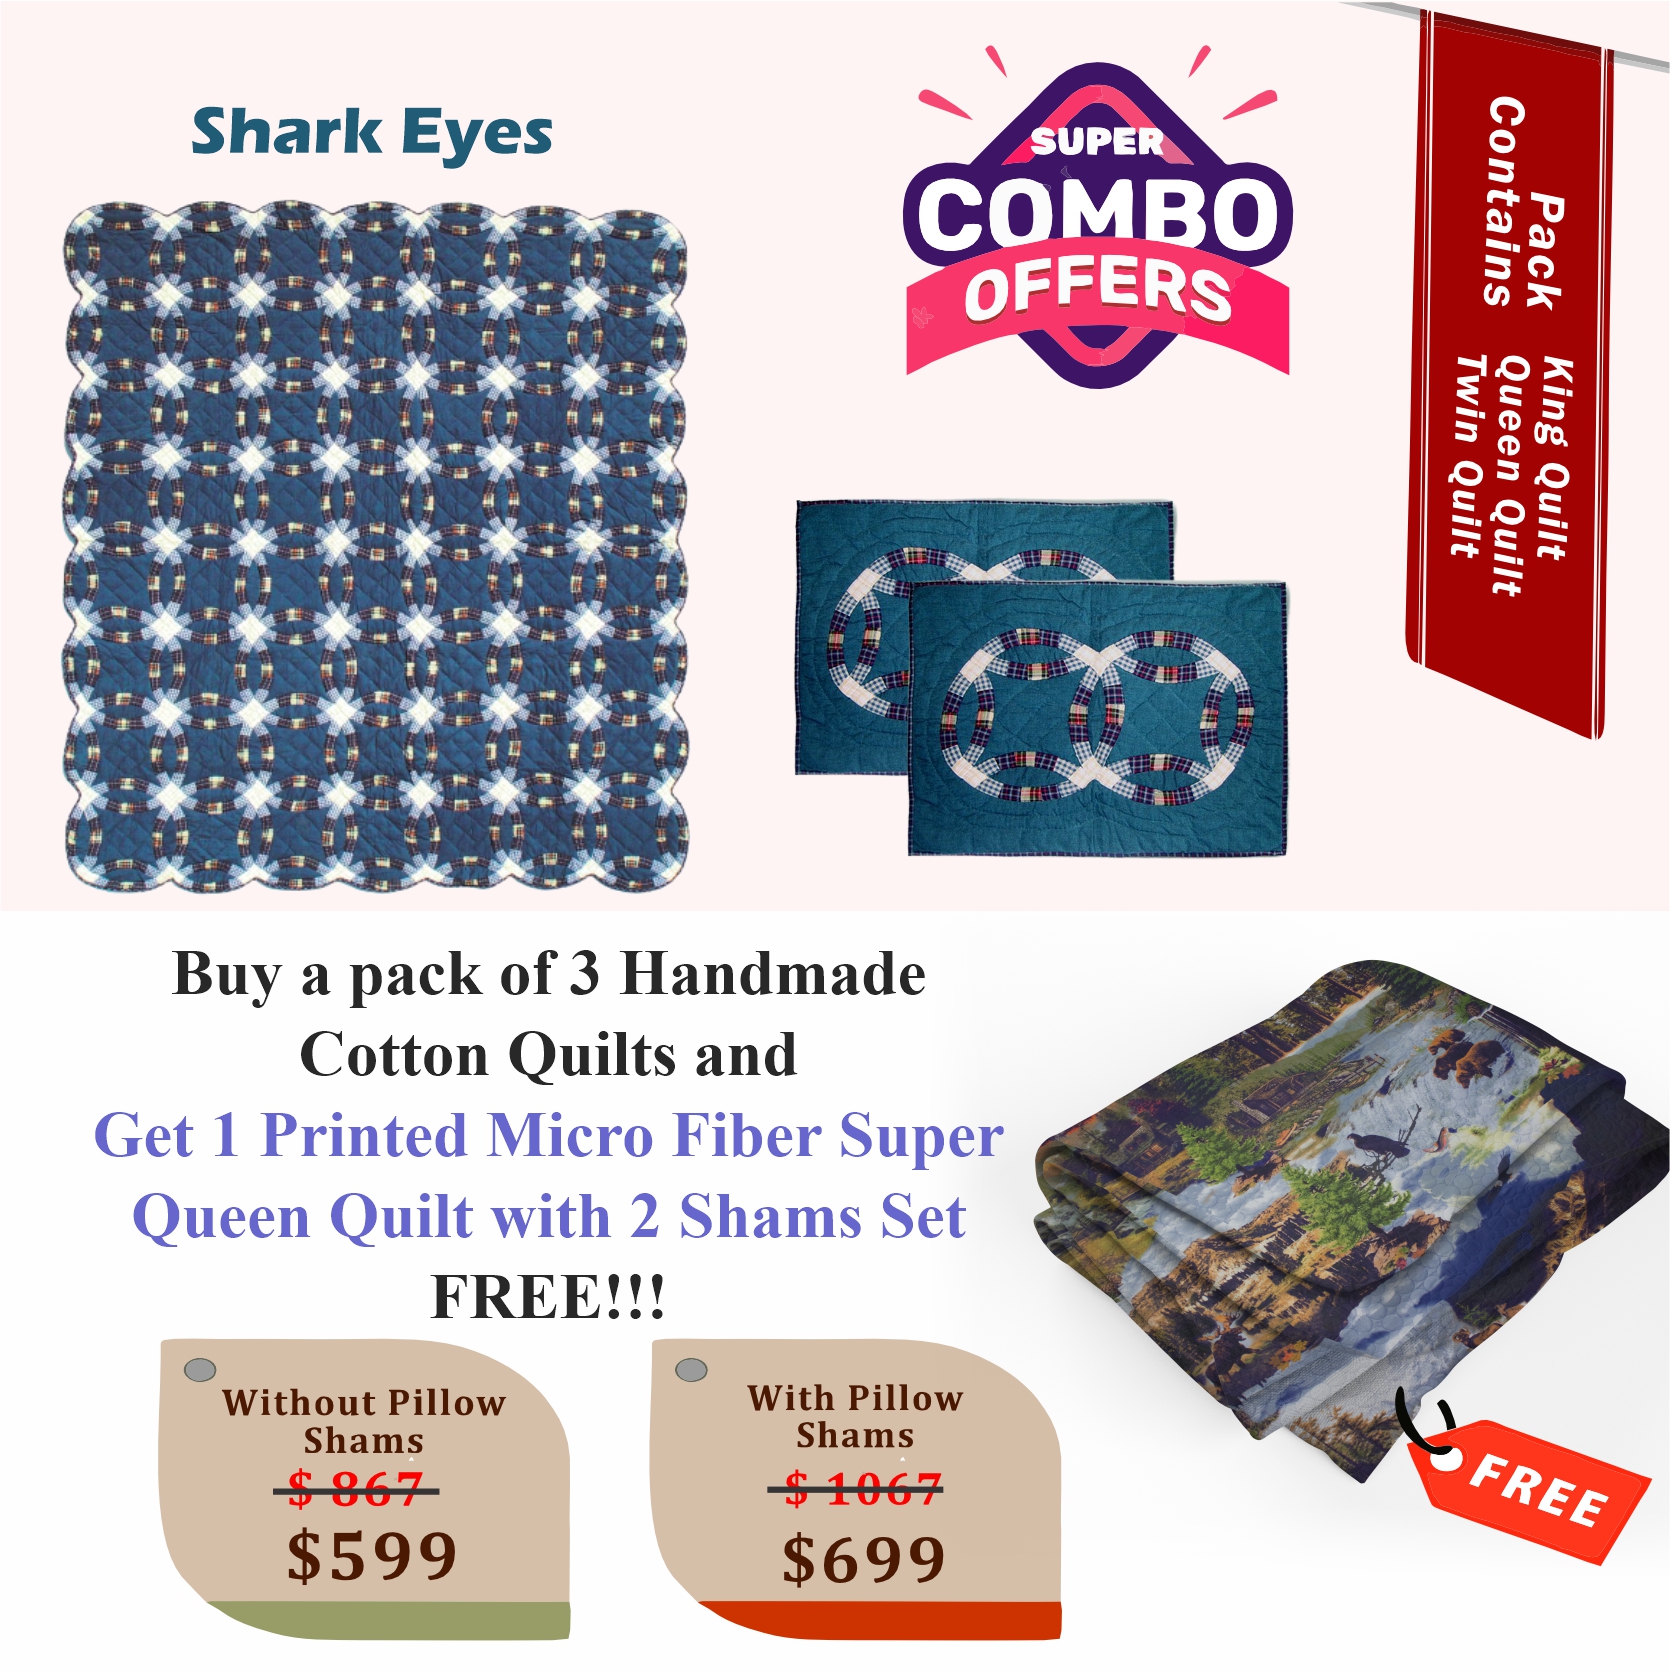 Shark Eyes- Handmade Cotton quilts | Buy 3 cotton quilts and get 1 Printed Microfiber Super Queen Quilt with 2 Shams set FREE